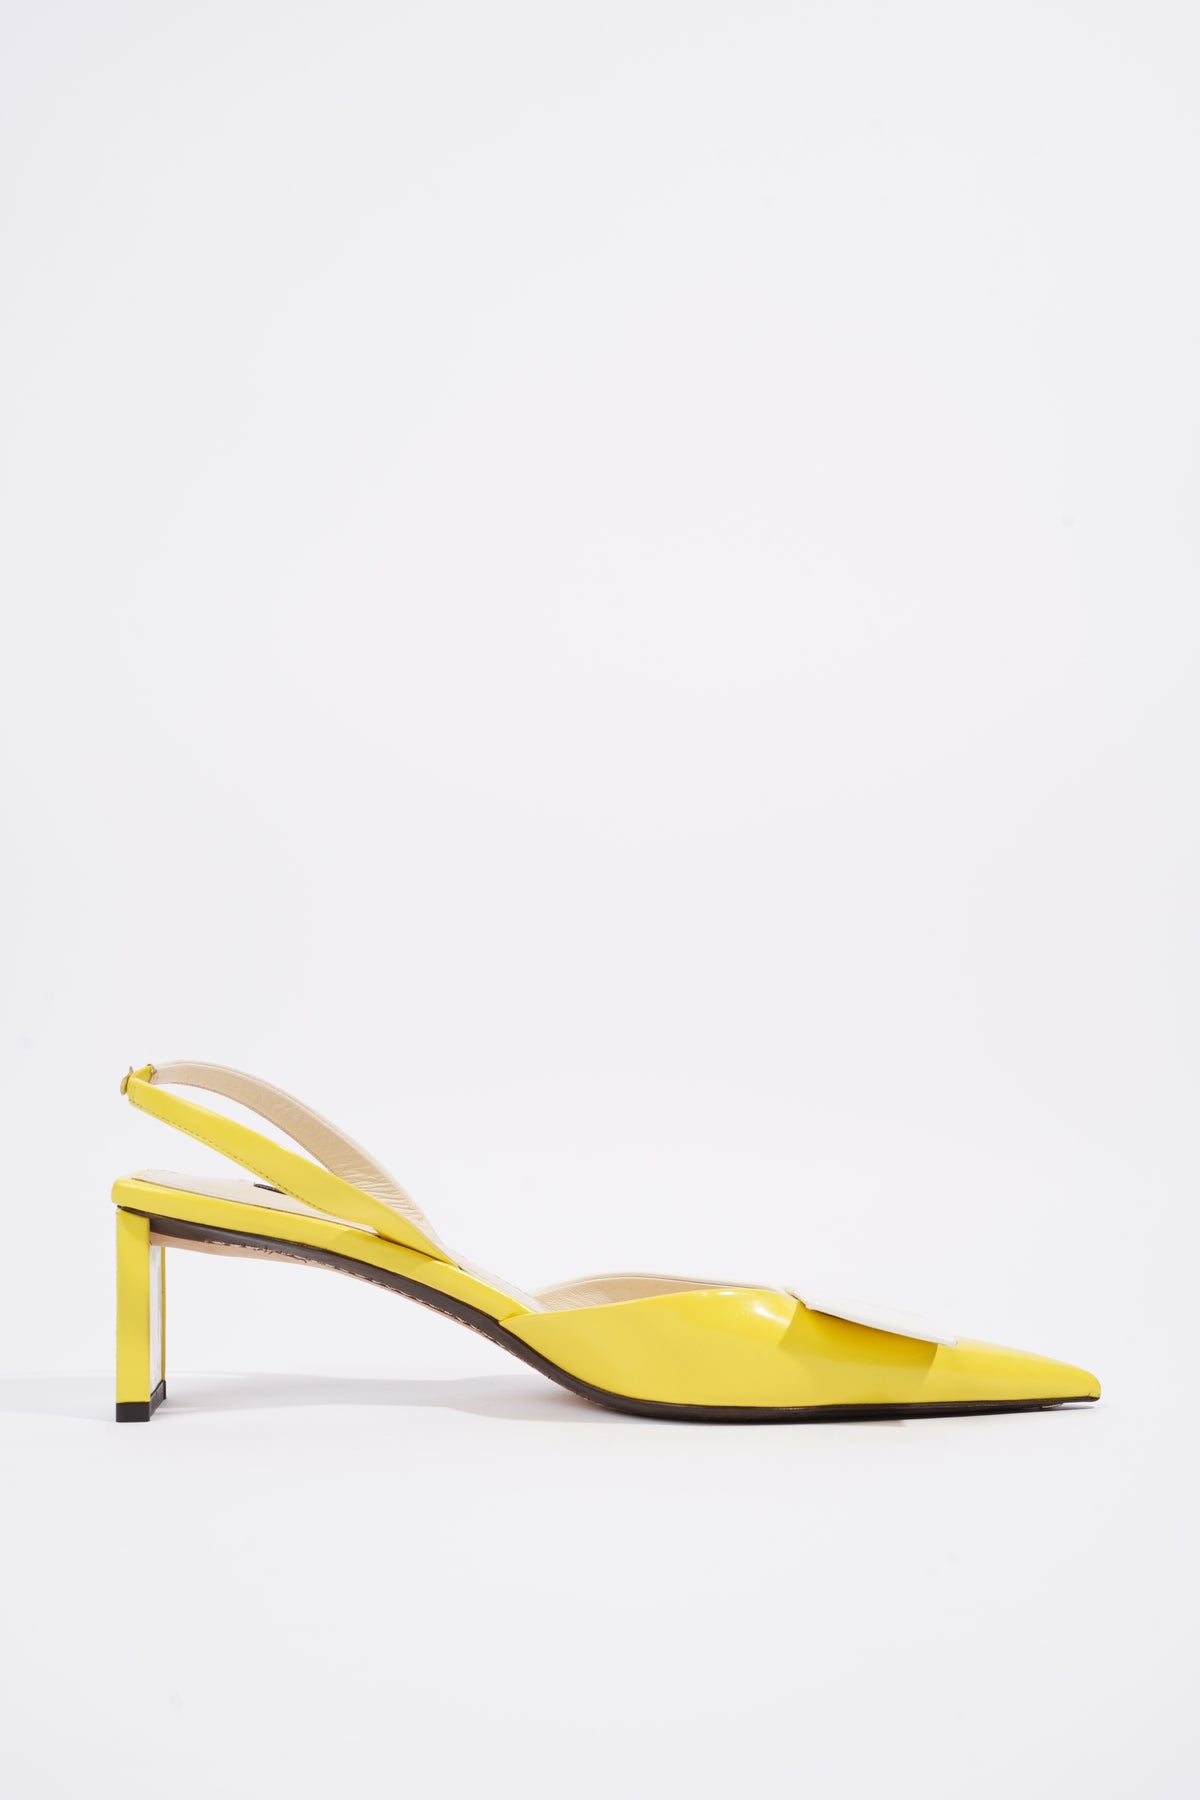 Louis Vuitton Yellow/White Leather Bow Slingback Pumps Size 37